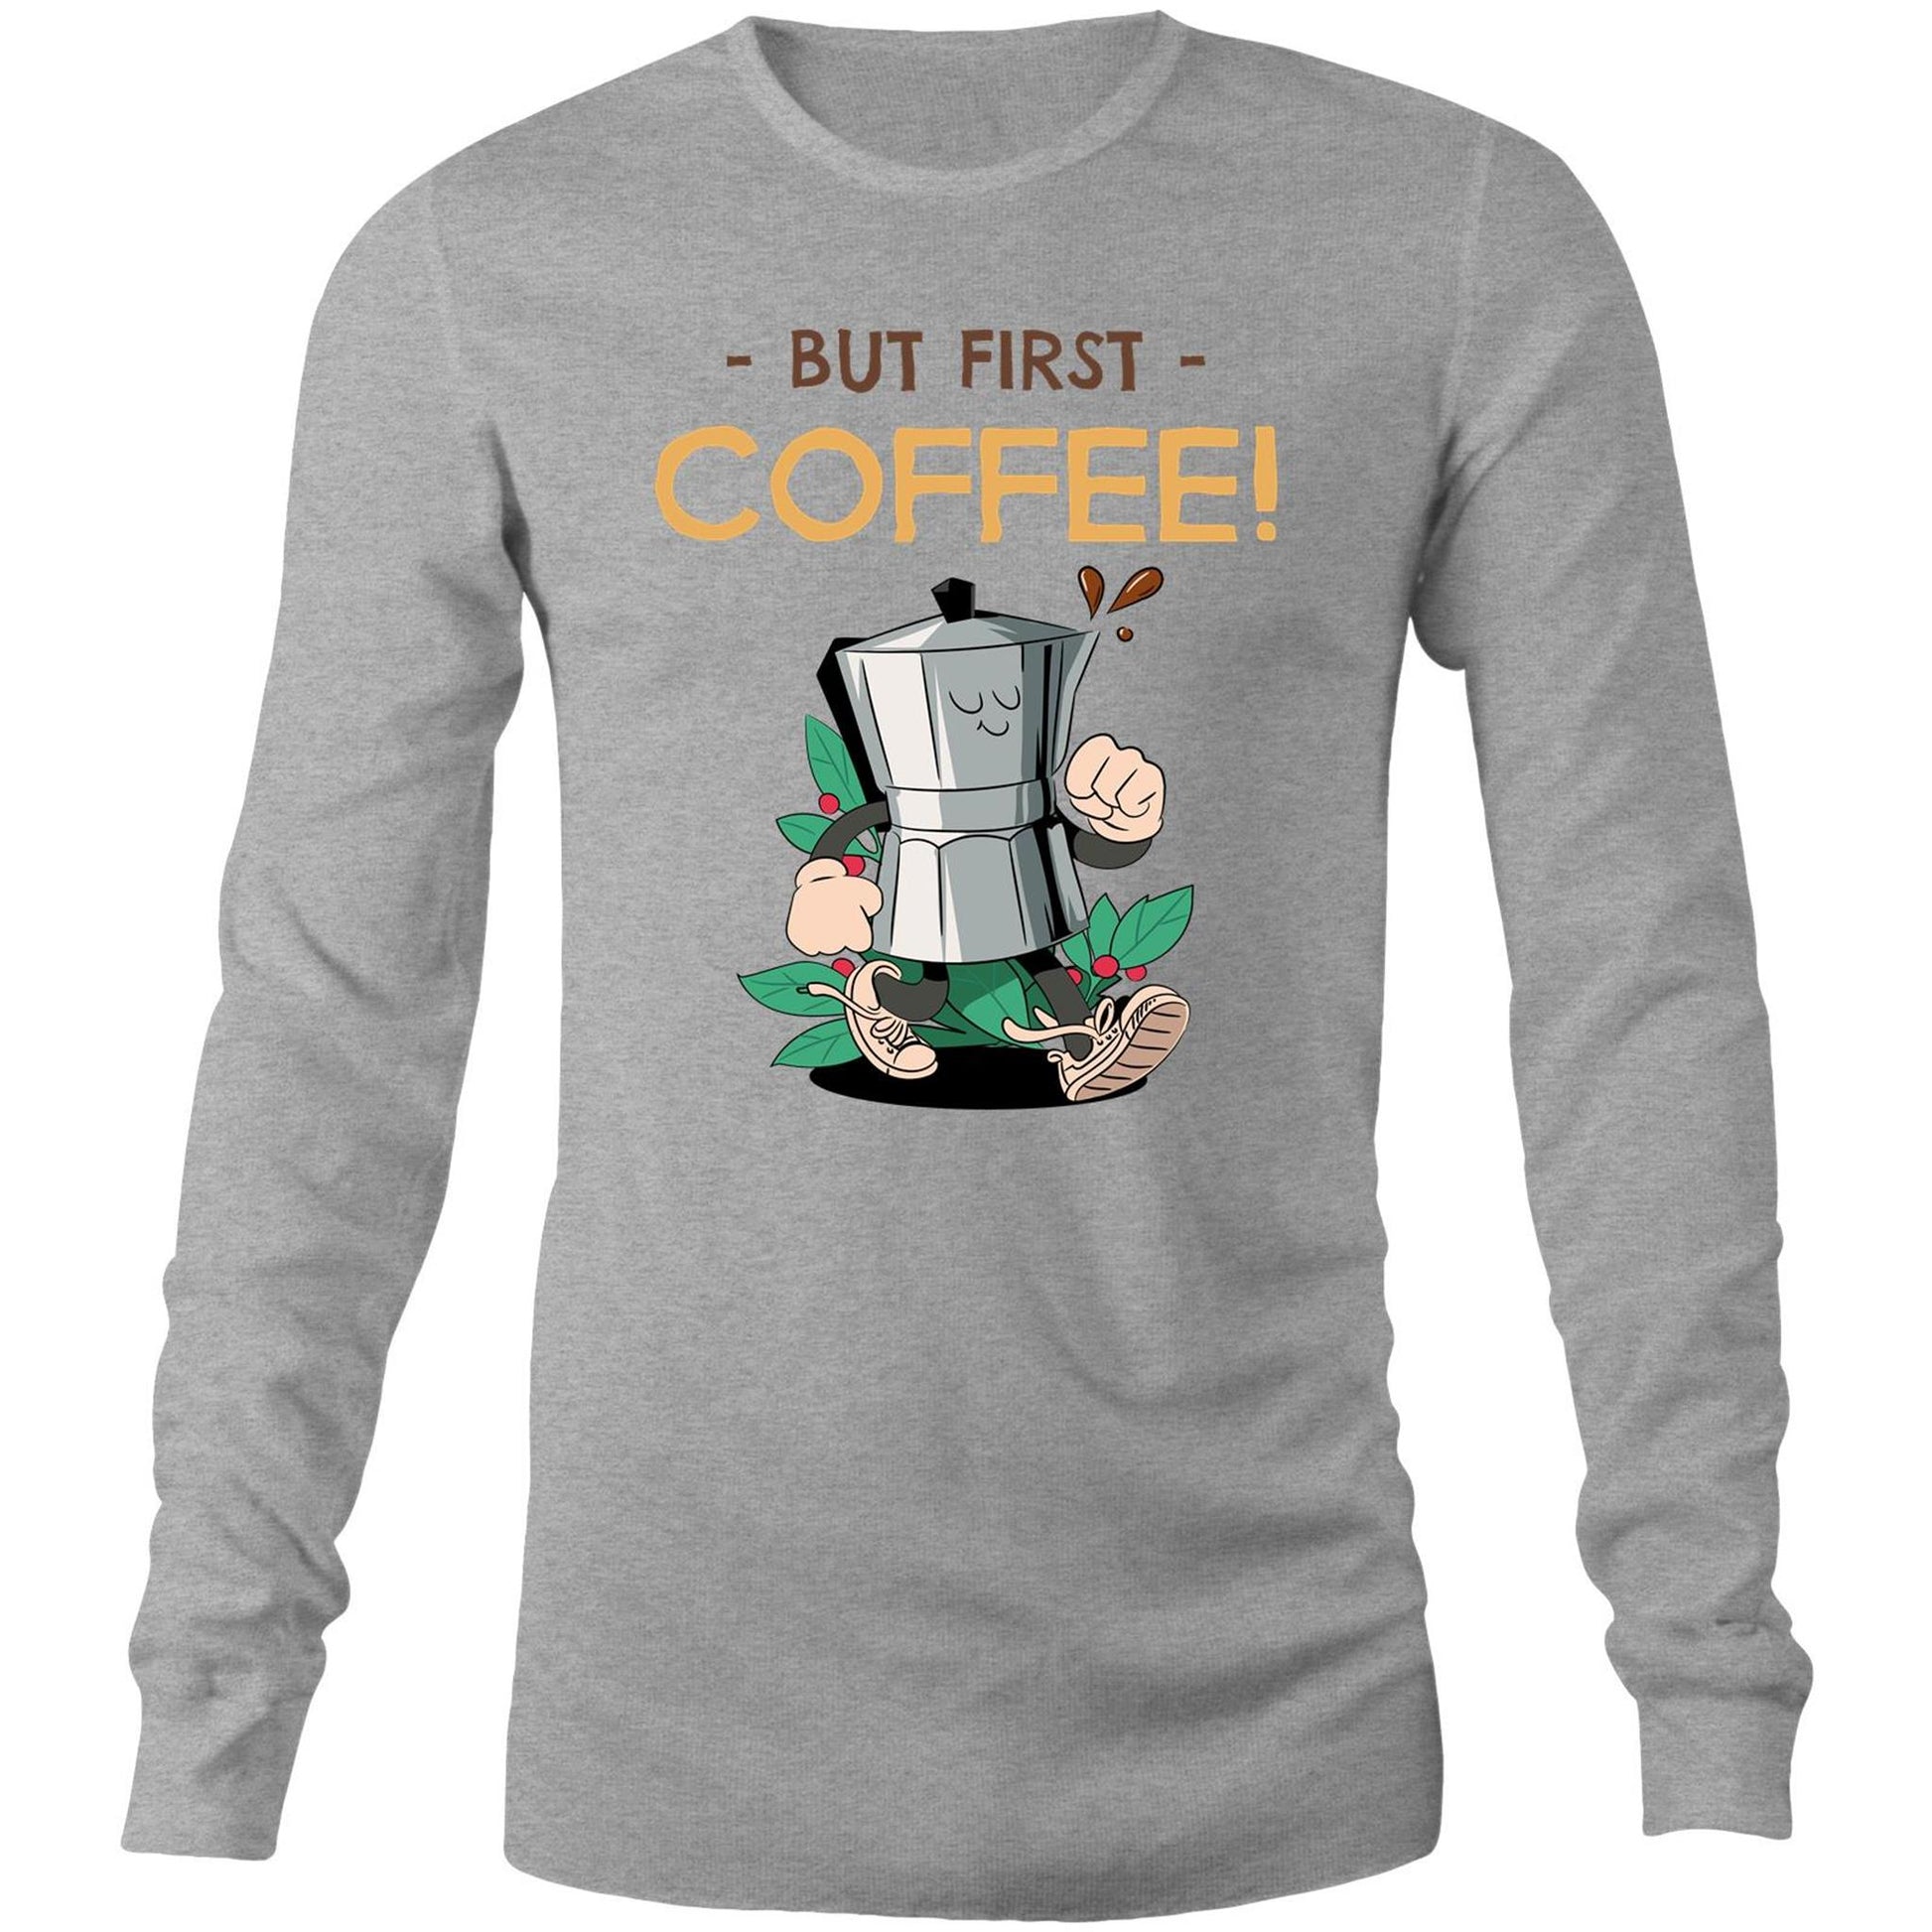 But First Coffee - Long Sleeve T-Shirt Grey Marle Unisex Long Sleeve T-shirt Coffee Retro